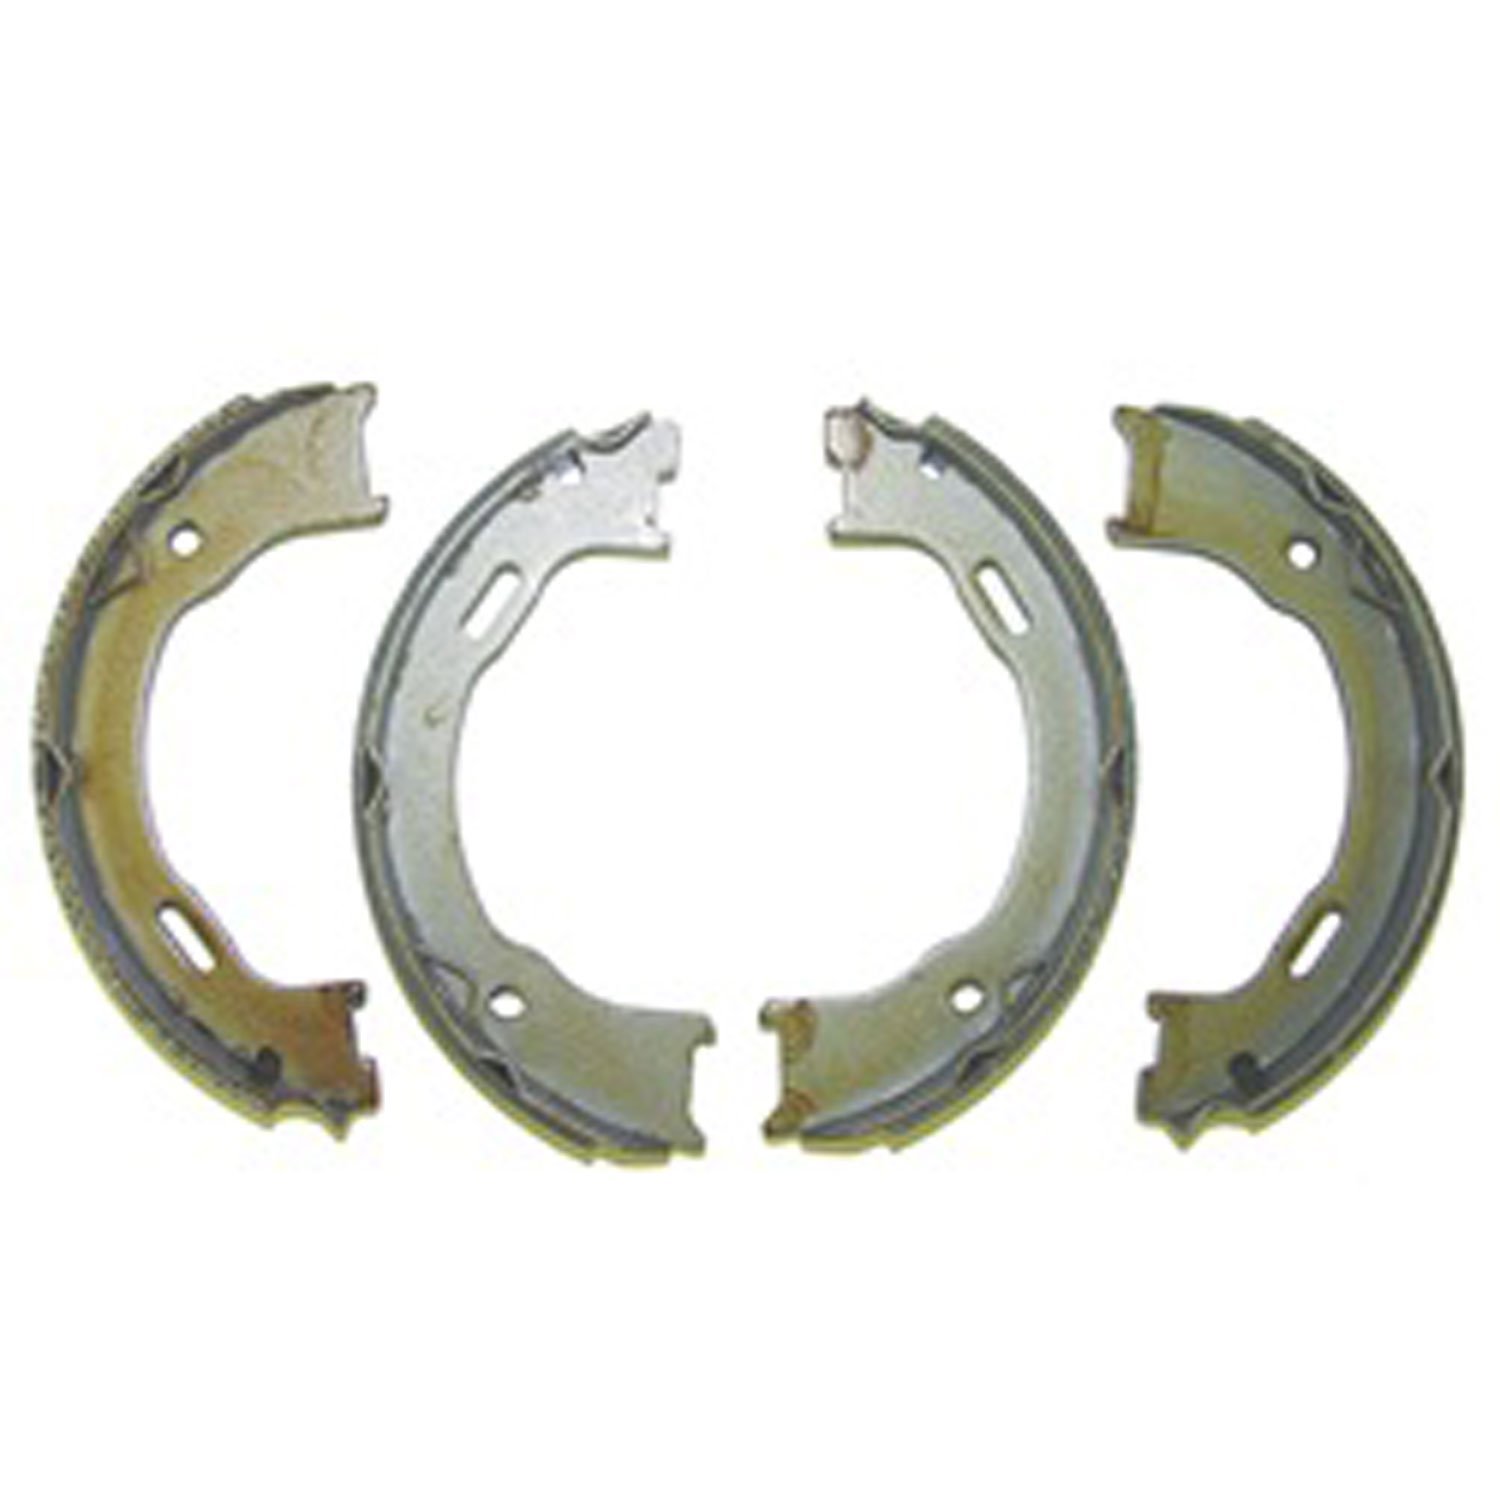 These replacement emergency brake shoes from Omix-ADA fit 03-06 Jeep Liberty KJ and 04-06 Jeep Wrangler Unlimited LJ